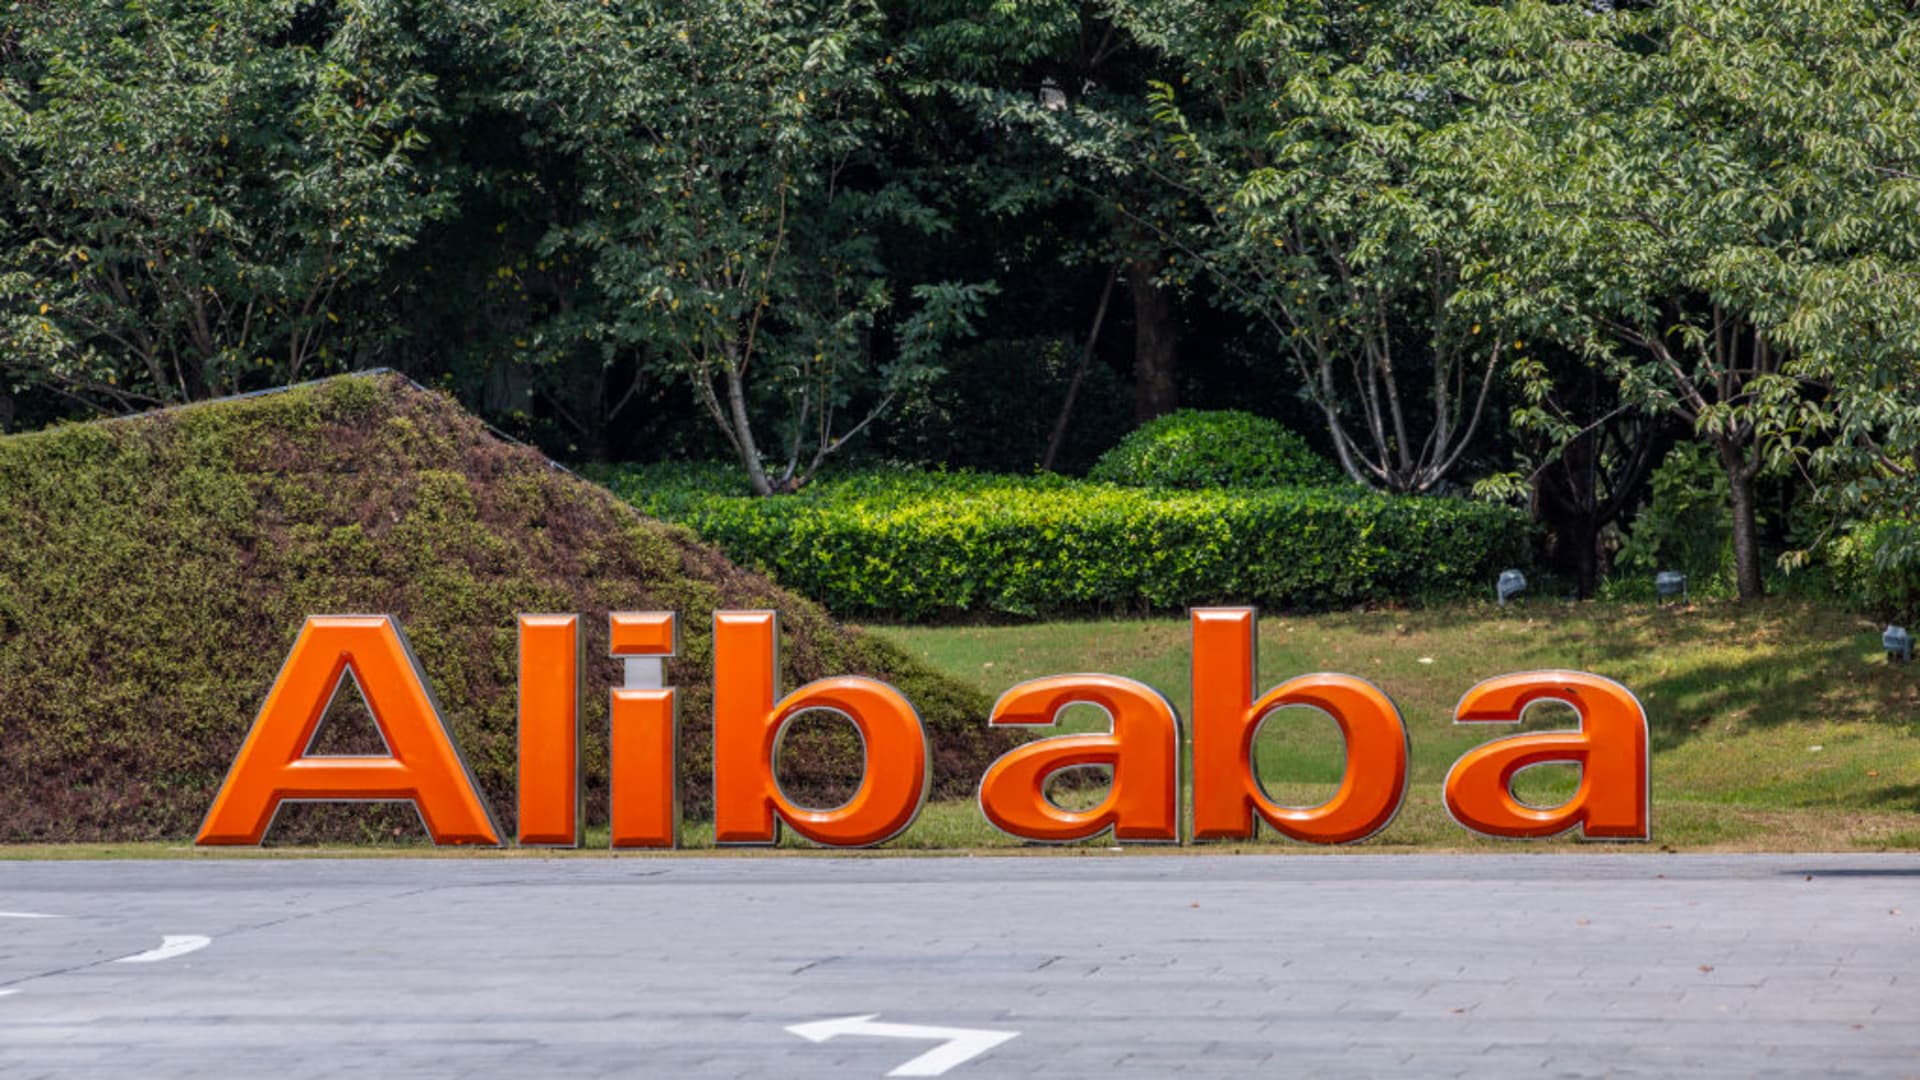 The Alibaba Group logo is seen at Alibaba Xixi Campus on August 8, 2021 in Hangzhou, Zhejiang Province of China.